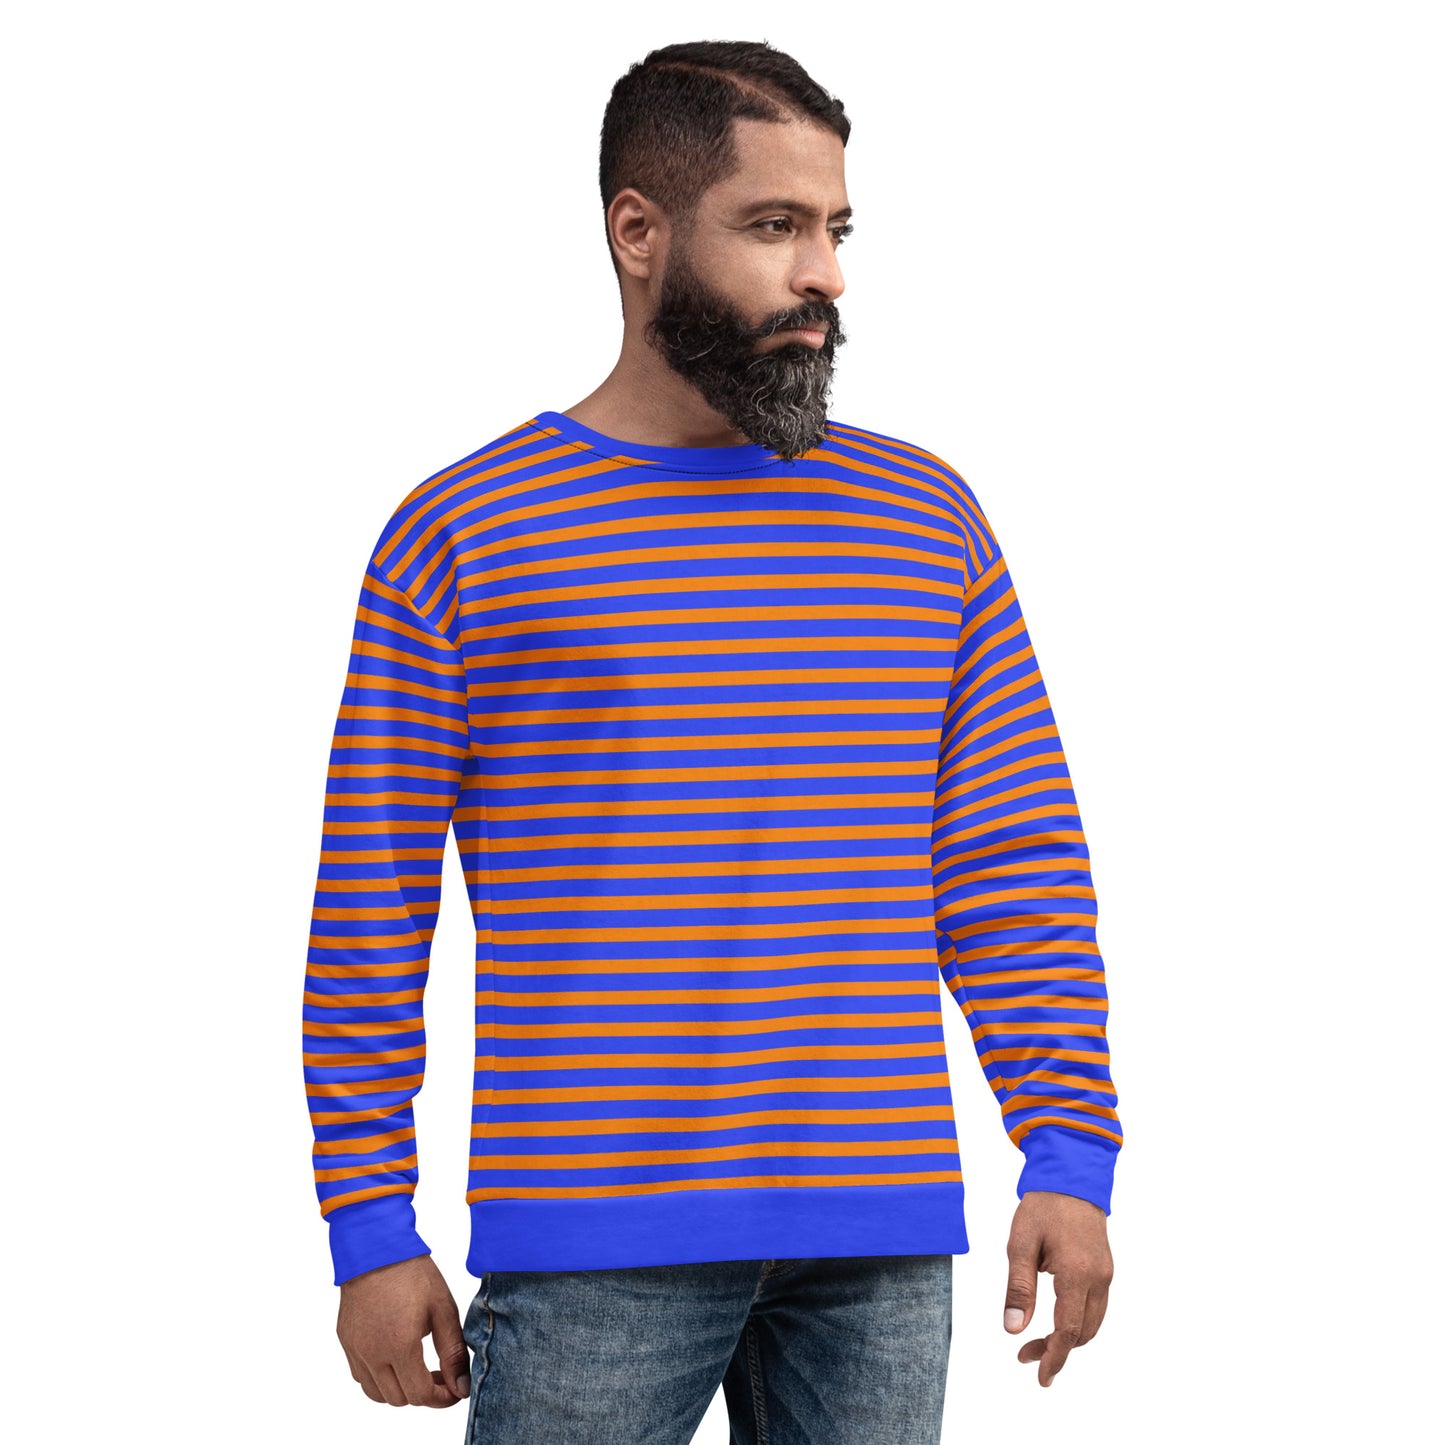 Blue and Orange Stripe Sweater: A Fun and Stylish Option for Men and Women